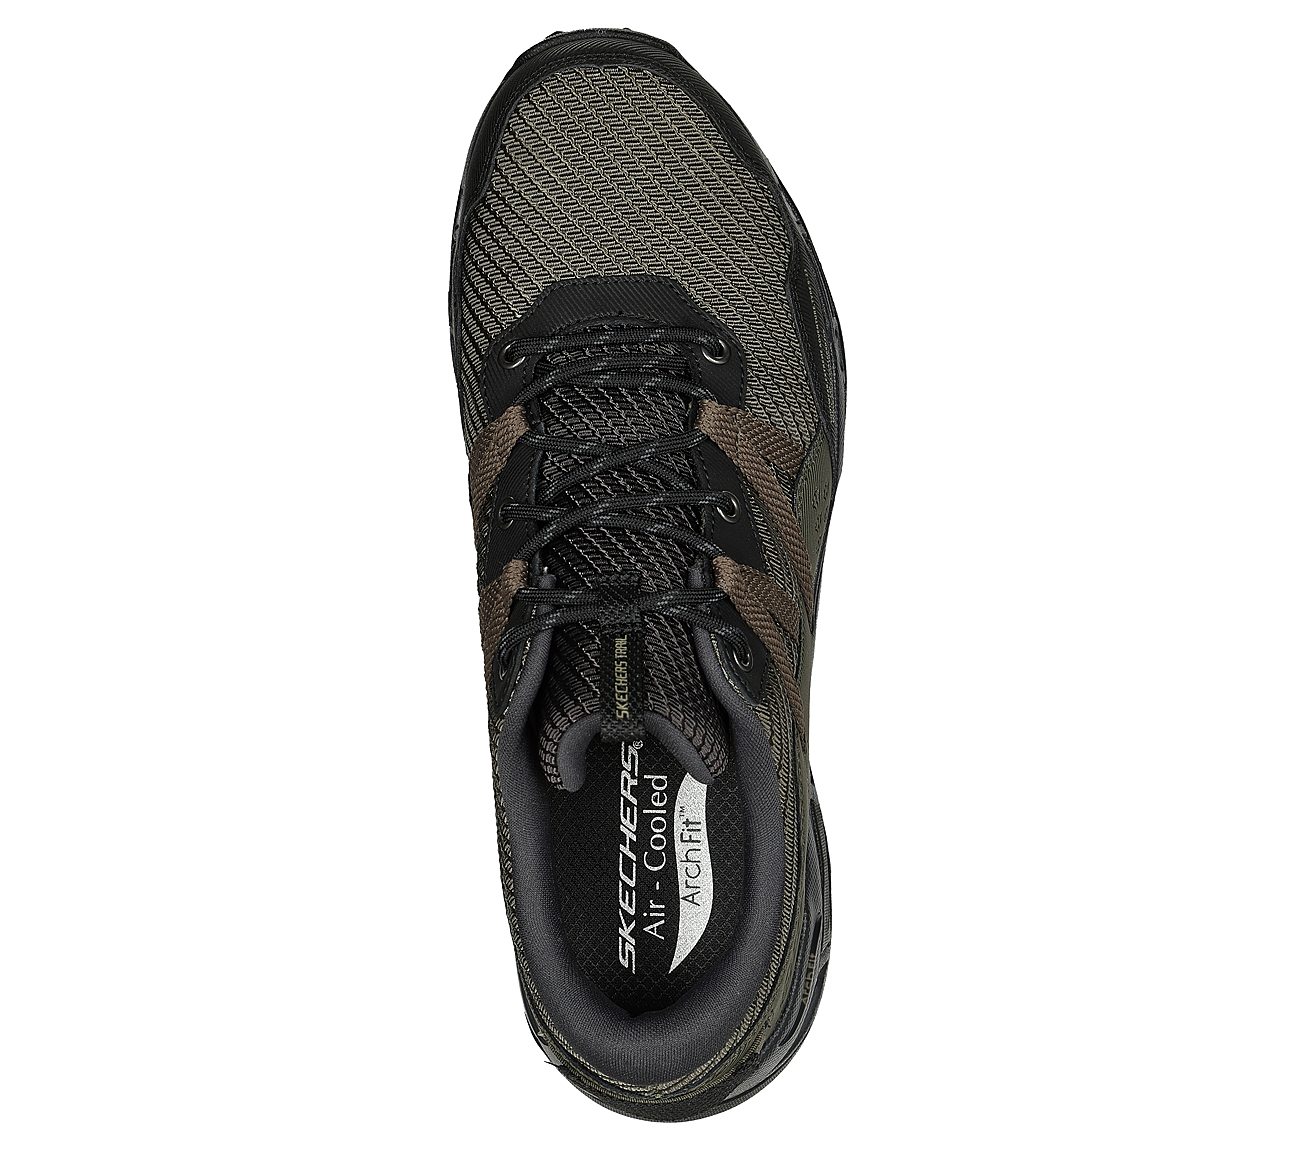 ARCH FIT GLIDE-STEP TRAIL, OLIVE/BLACK Footwear Top View